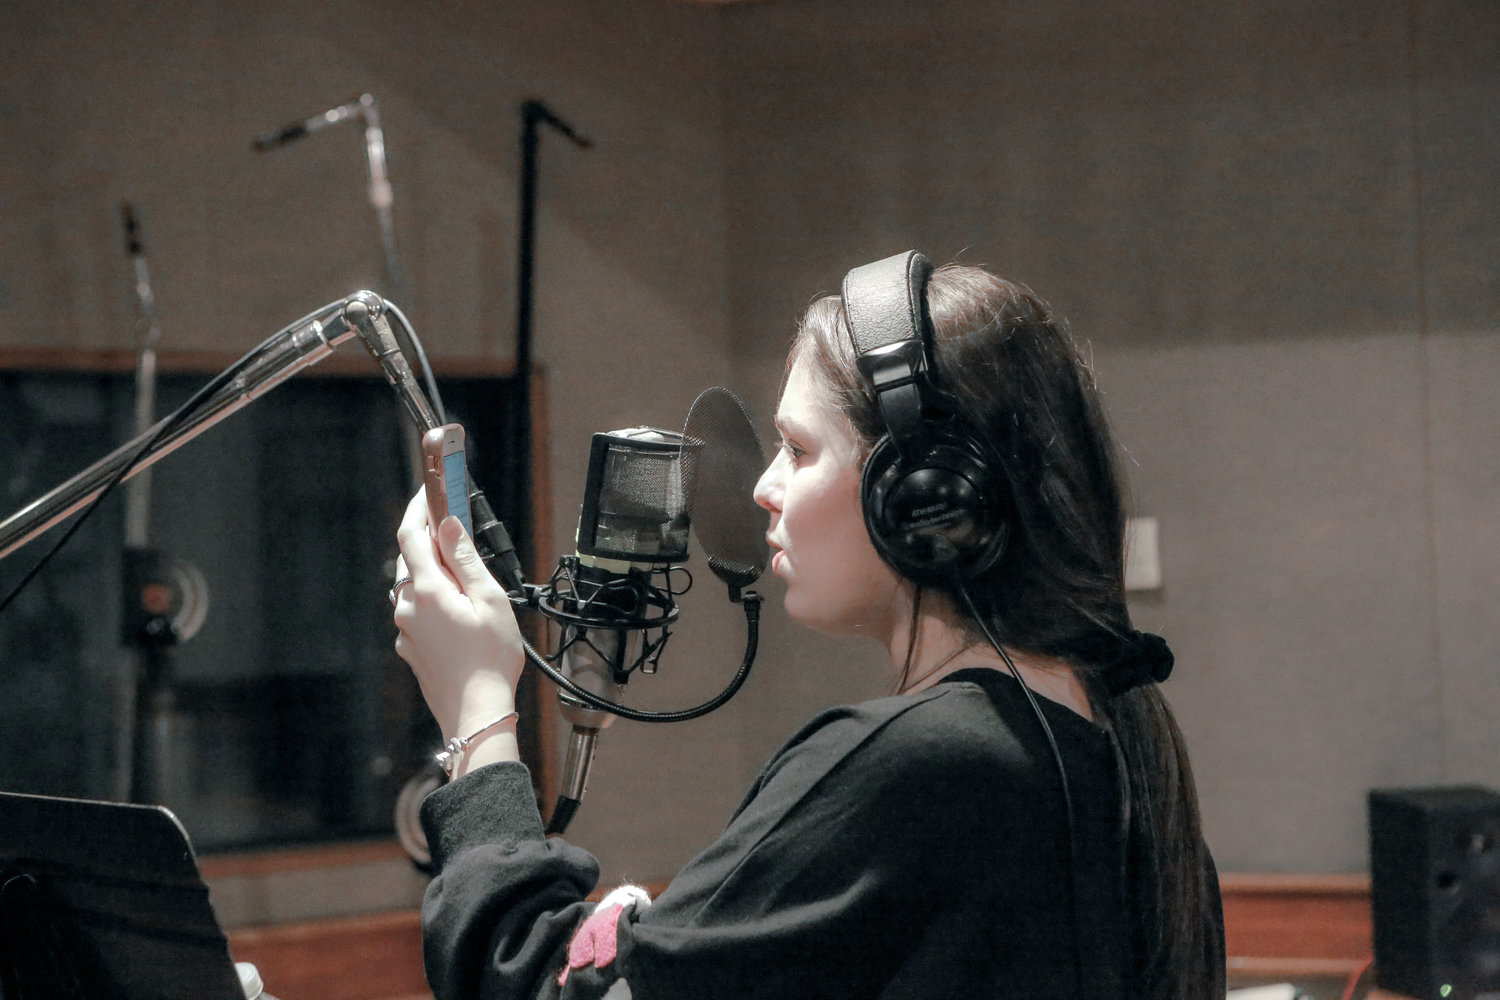 Horowitz said that each song featured in the documentary represents a different point in her mother’s journey, and every lyric has a specific meaning.